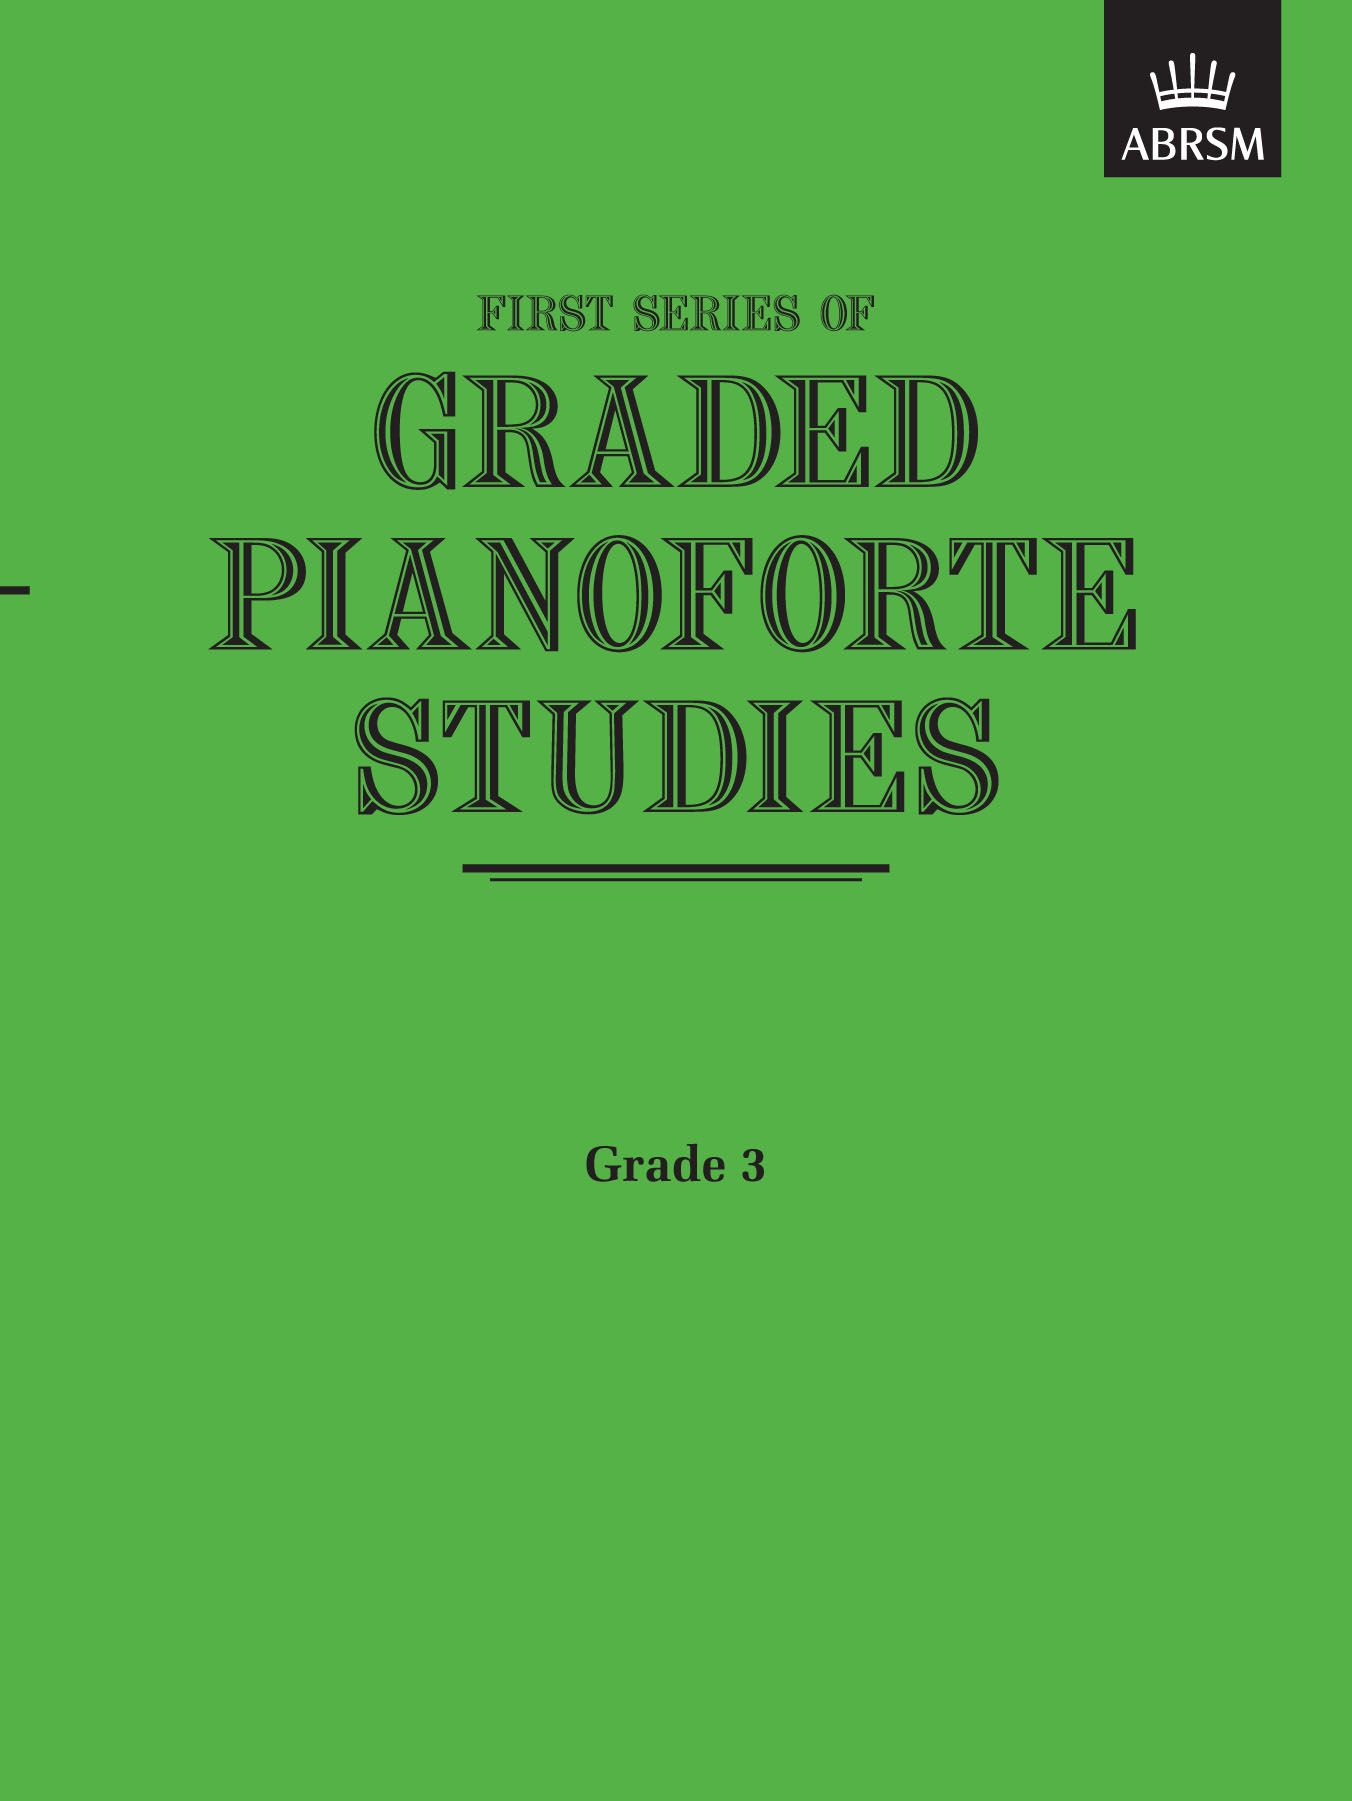 First Series of Graded Pianoforte Studies G3